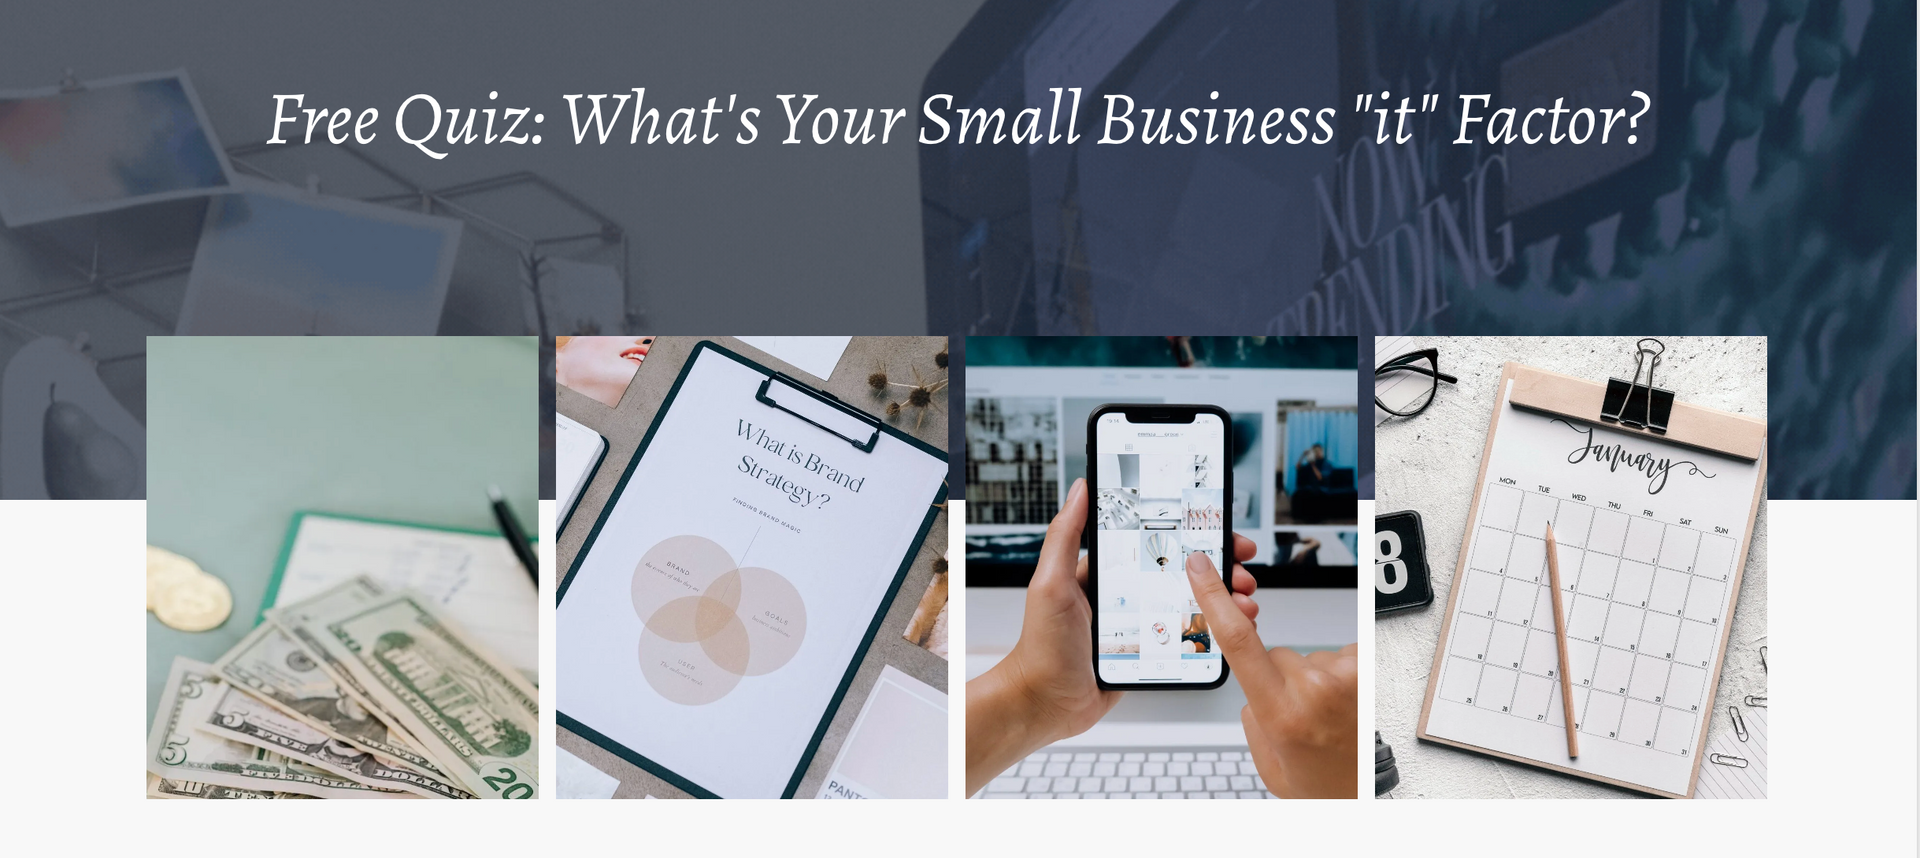 A free quiz what 's your small business 's factor ?